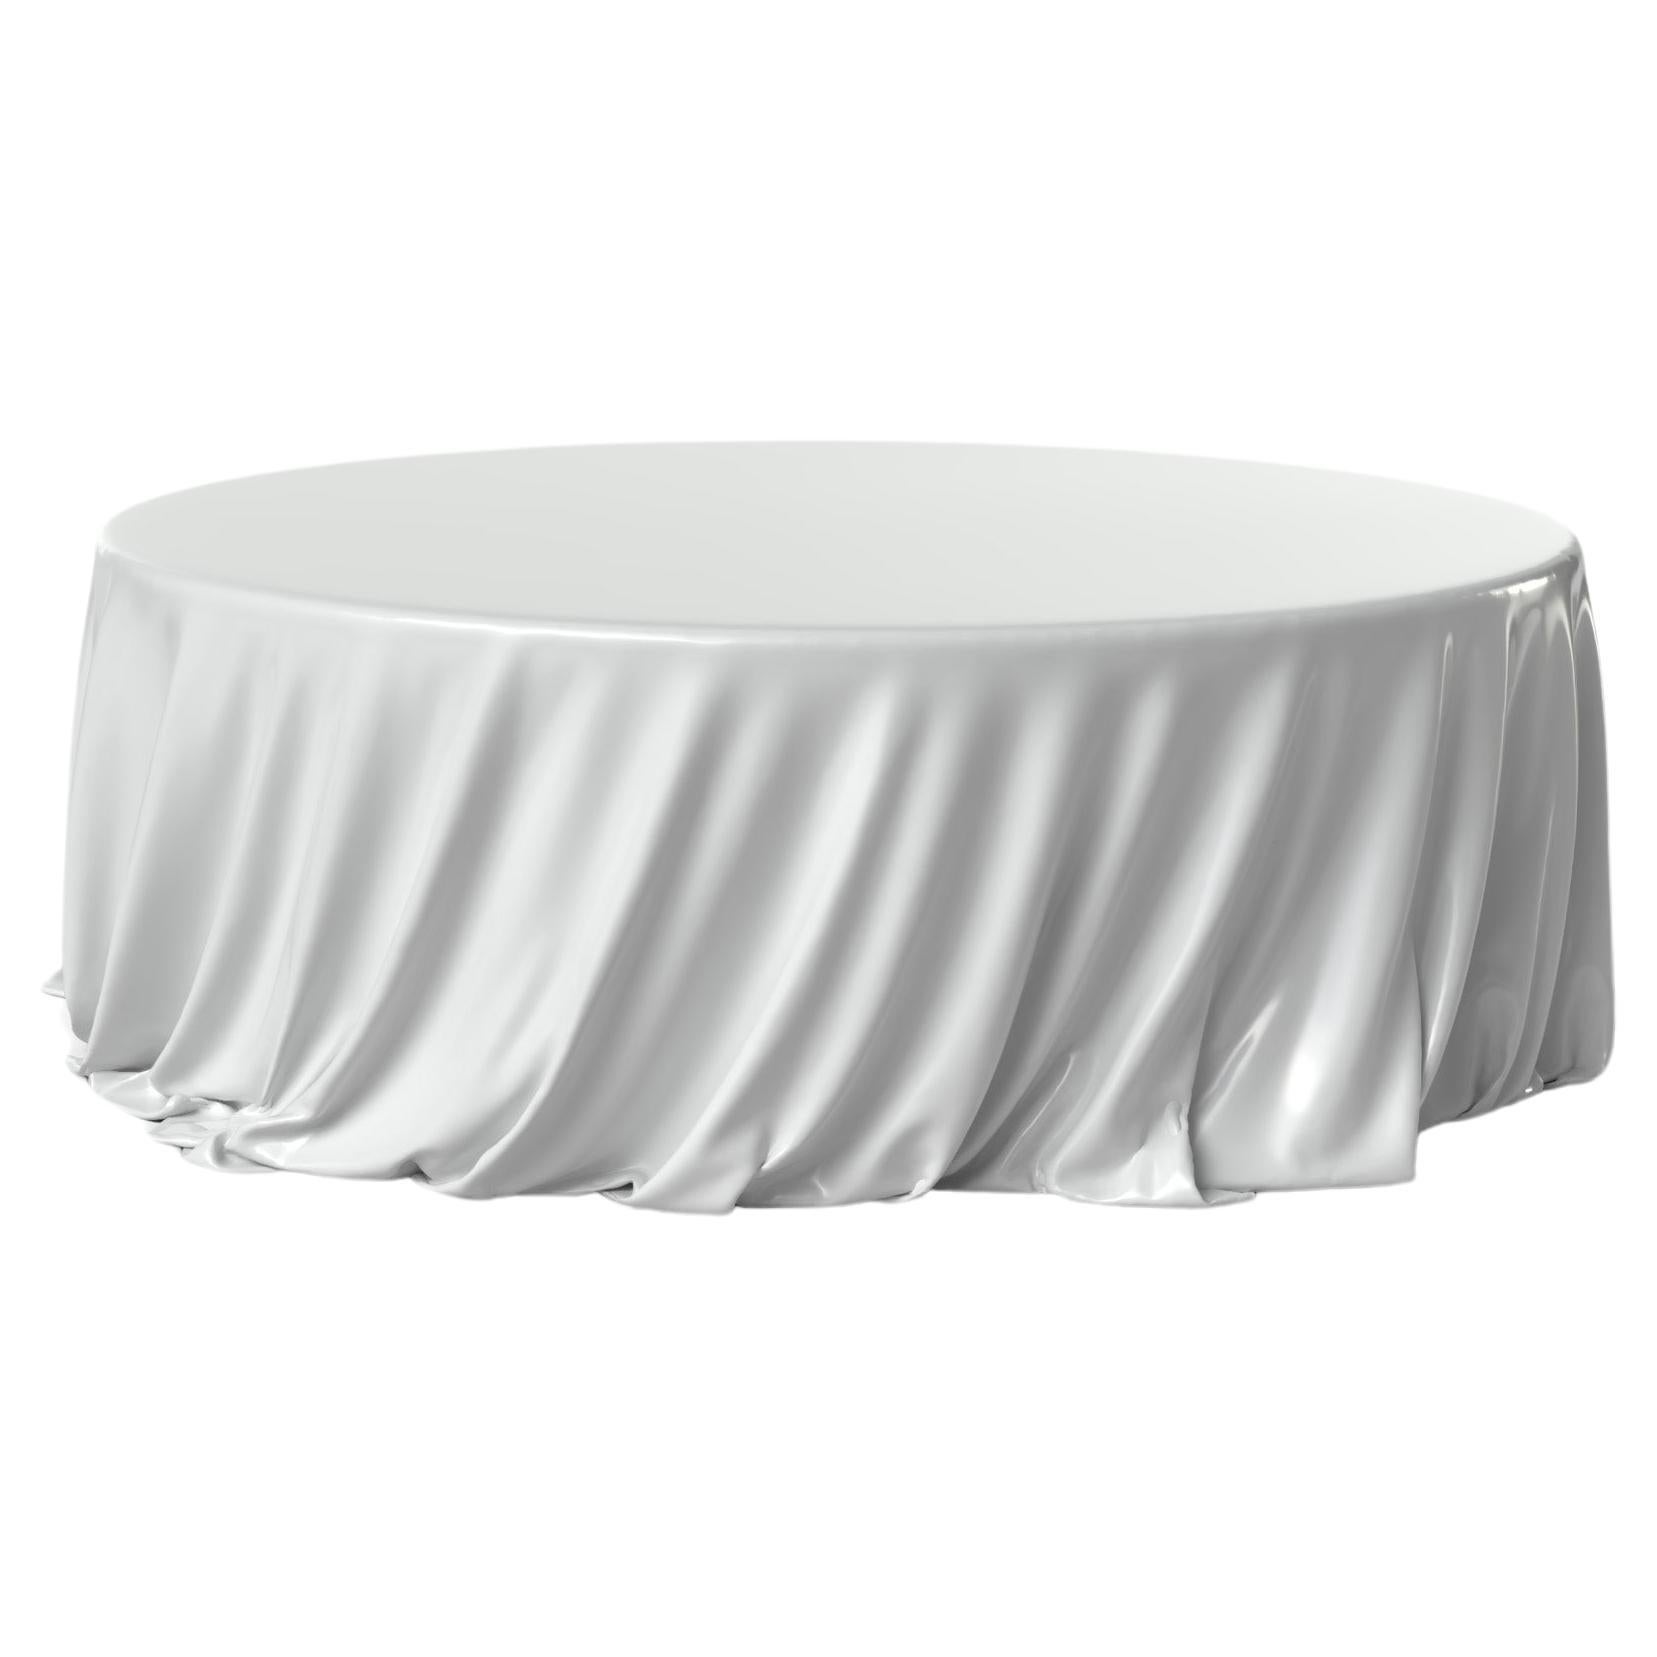 Levitaz Round Coffee Table in White Gloss